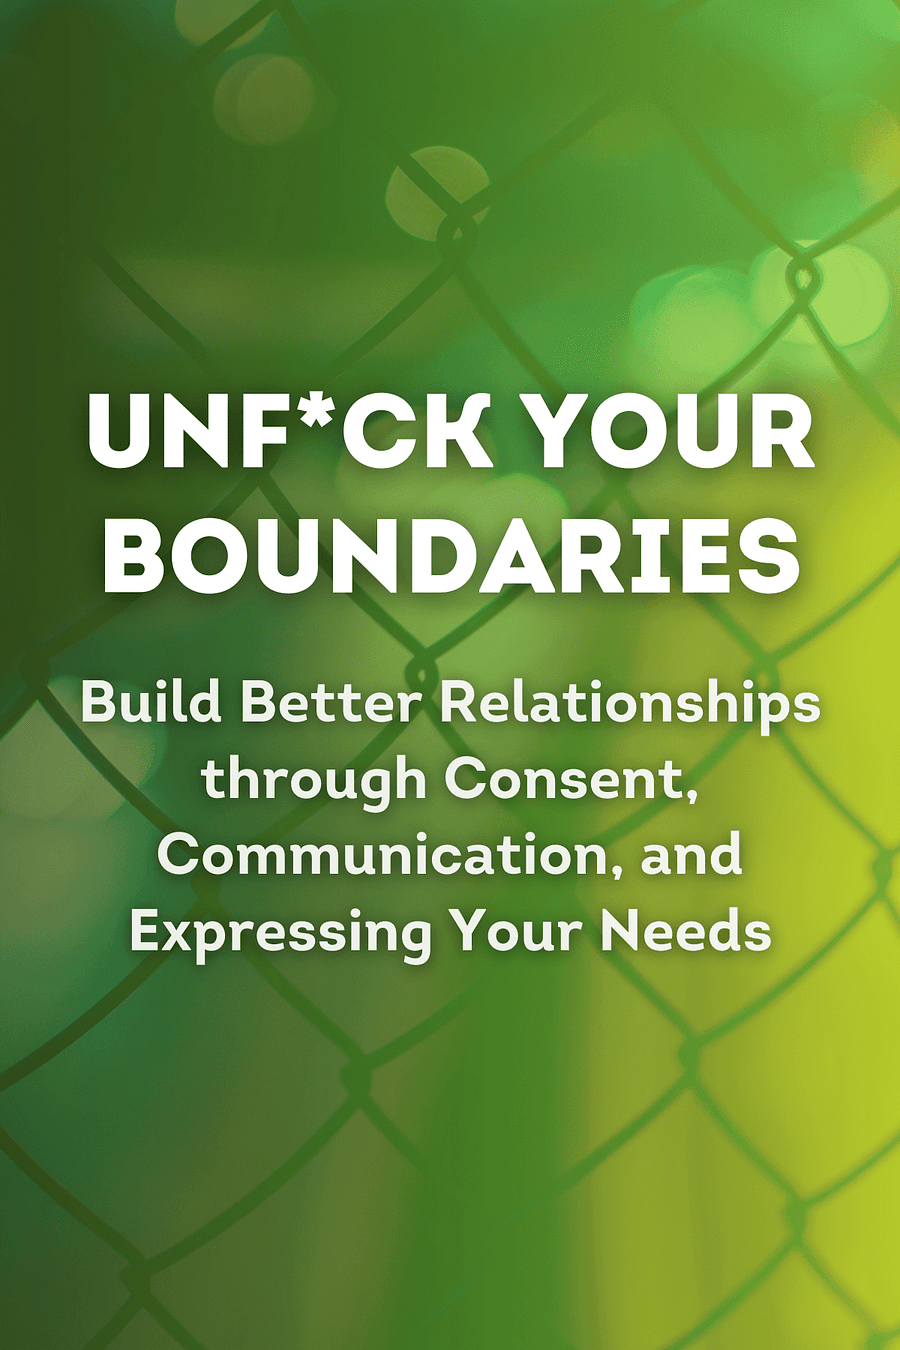 Unfuck Your Boundaries by Dr Faith G Harper - Book Summary